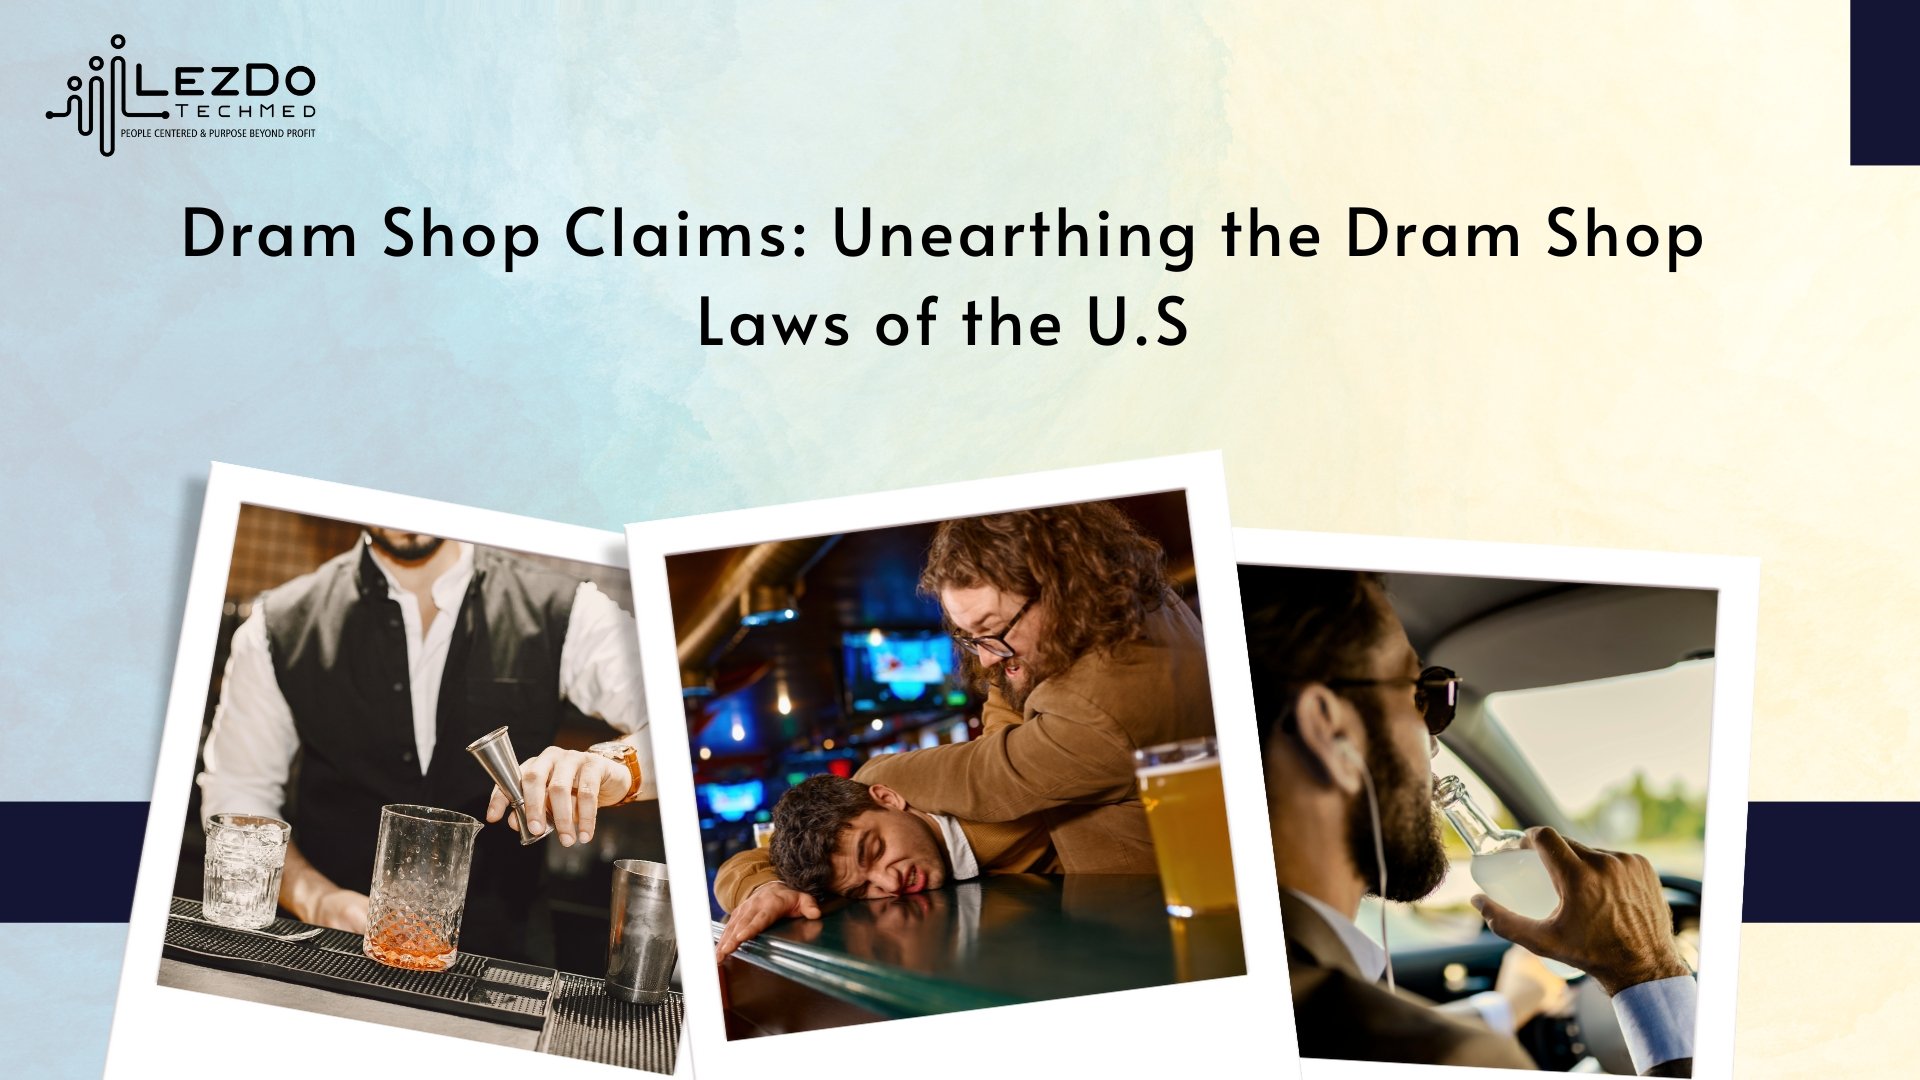 Dram Shop Claims: Unearthing the Dram Shop Laws of the U.S